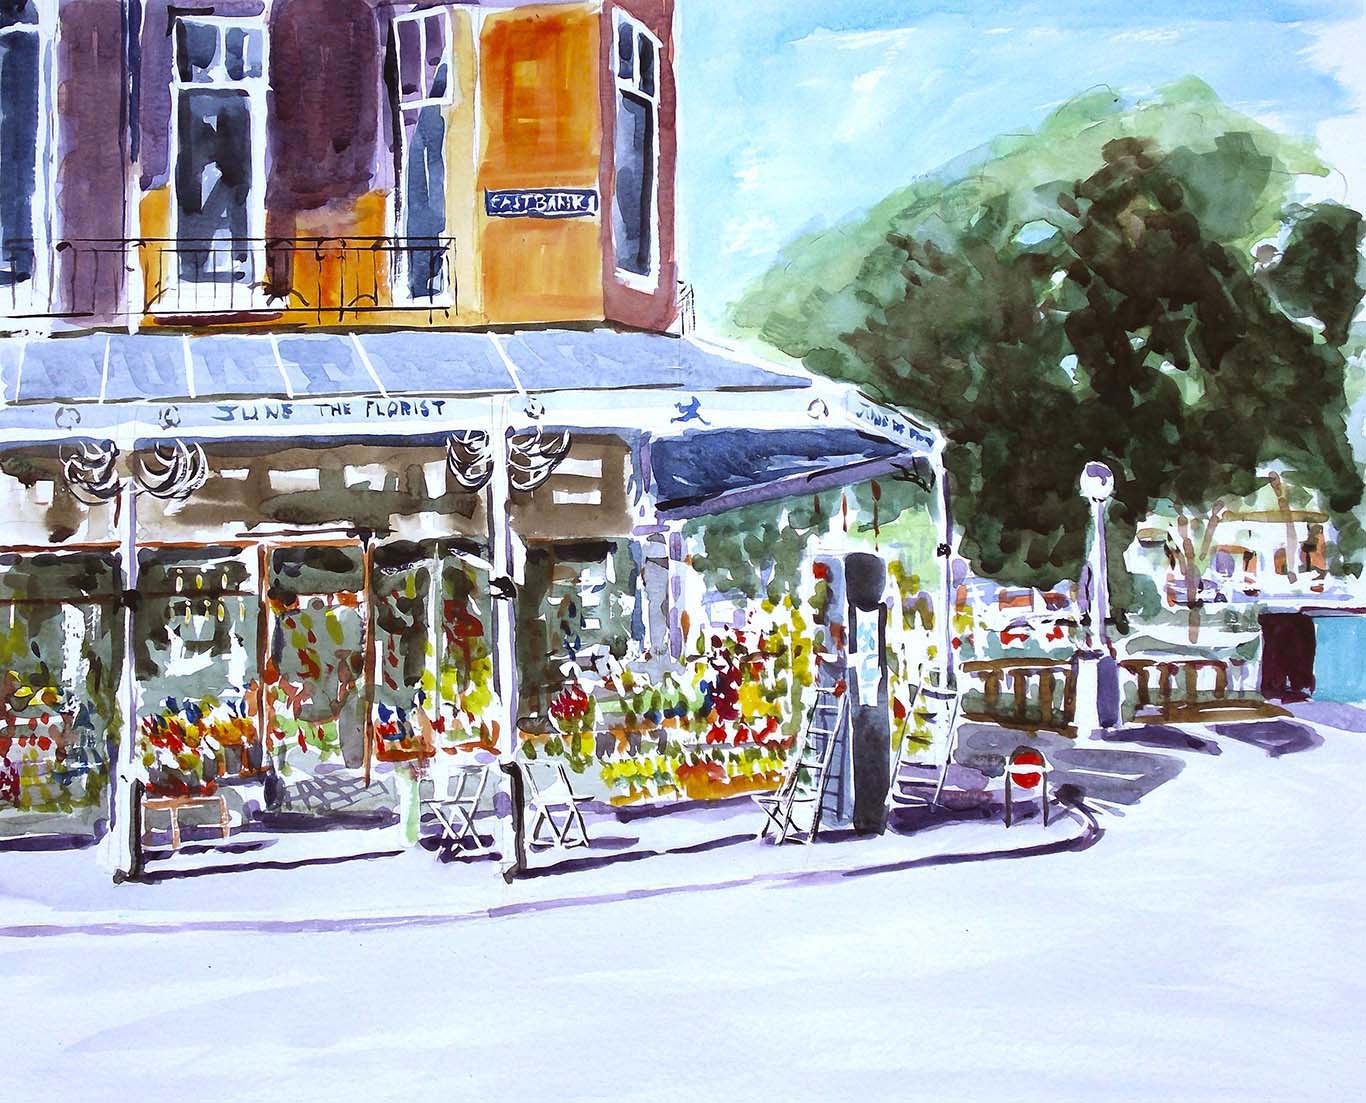 watercolour by artist roy munday, of june the florist, eastbank st. southport, merseyside